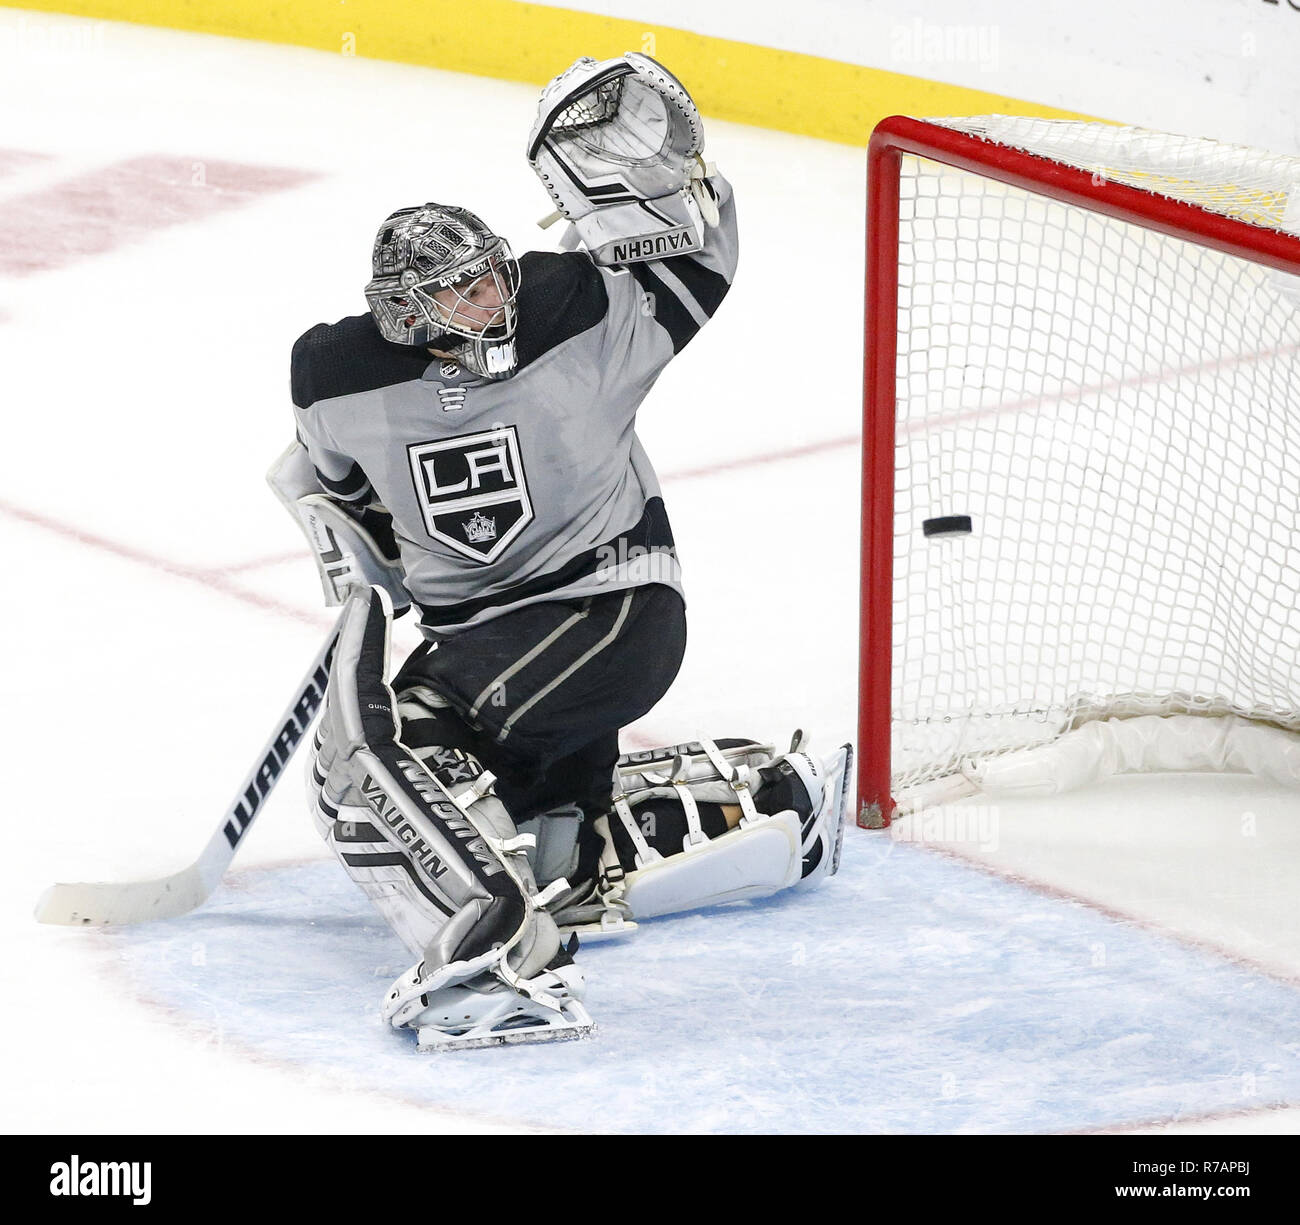 Los Angeles, California, USA. 8th Dec, 2018. Los Angeles Kings goalie Jonathan  Quick (32) makes save on a shot by Vegas Golden Knights during a 2018-2019  NHL hockey game in Los Angeles,